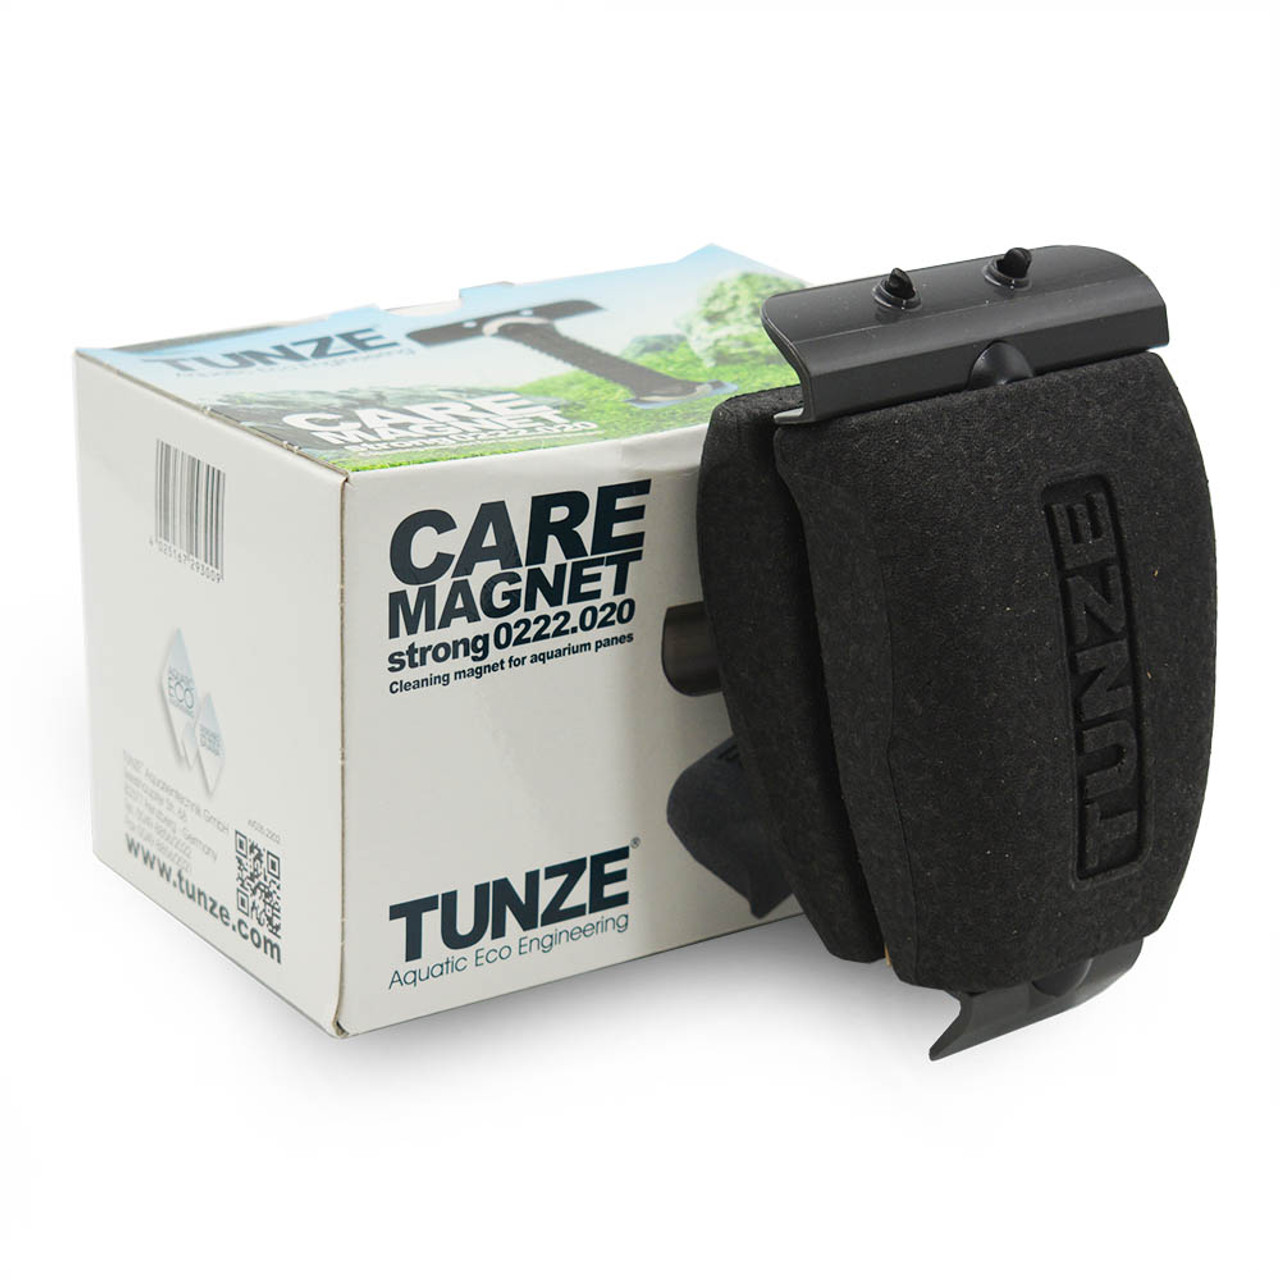 Care Magnet strong - Tunze